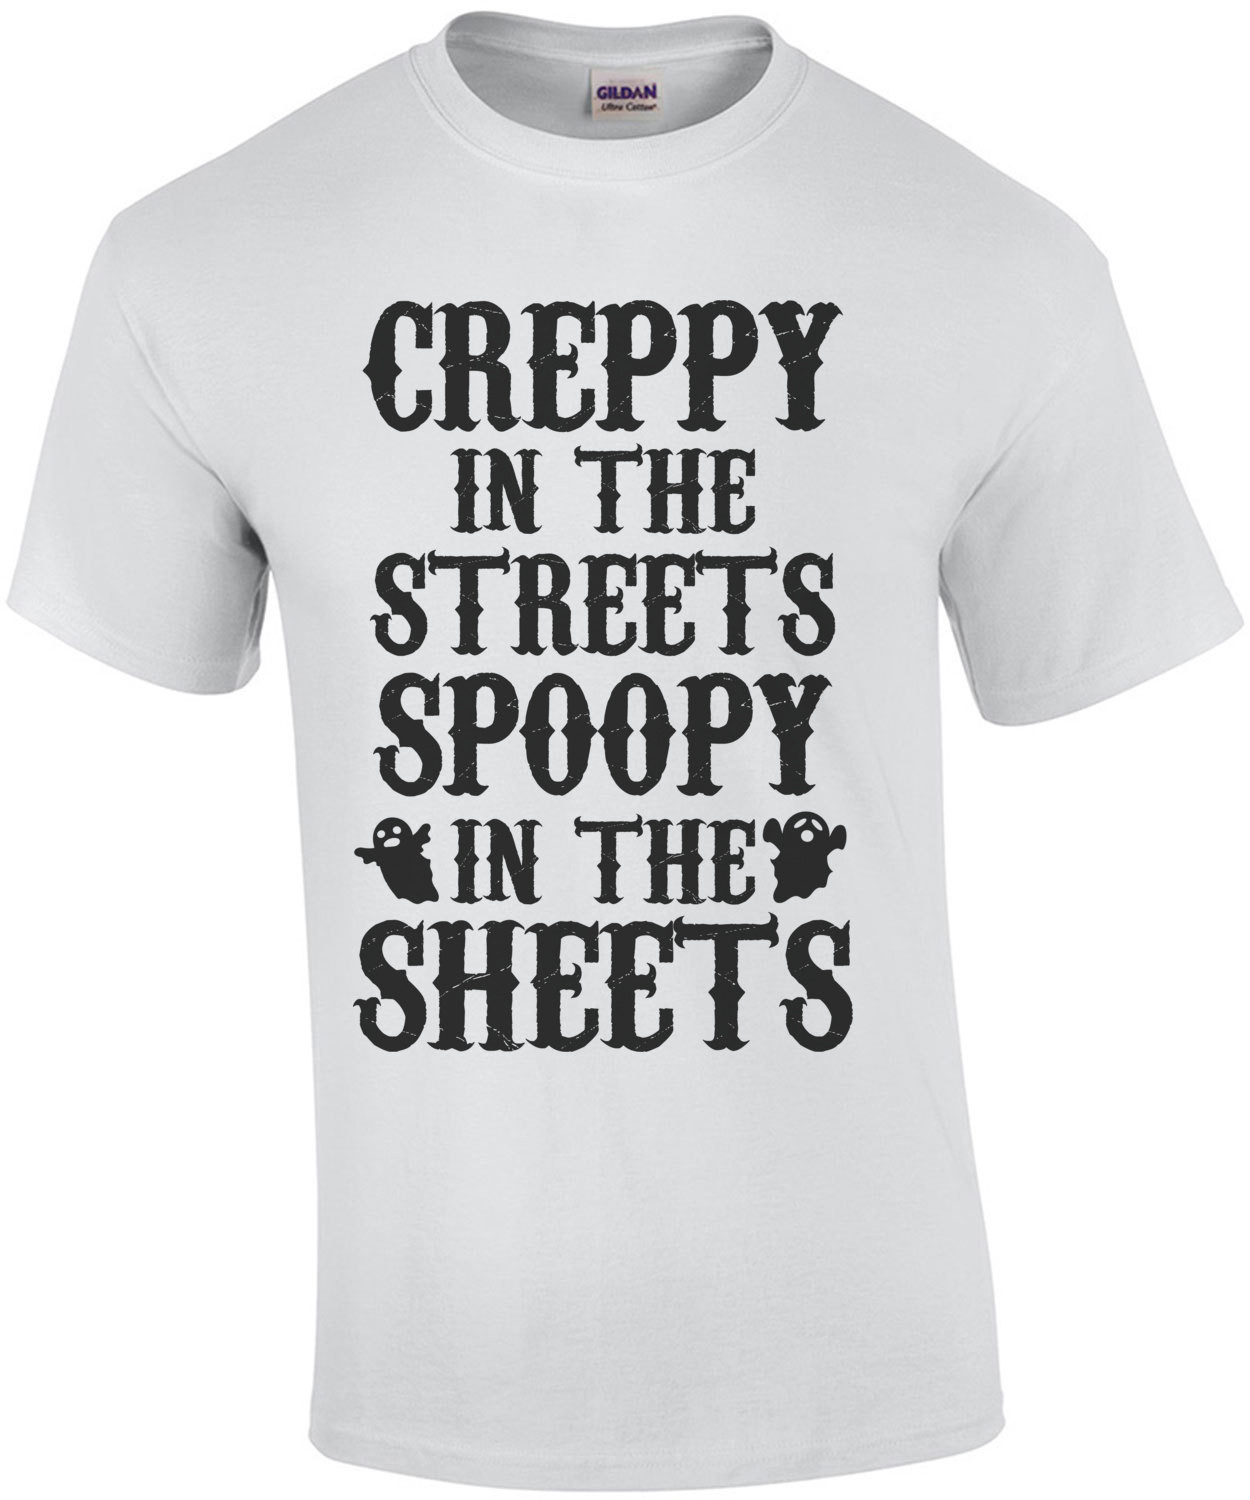 Creppy In The Streets Spoopy In The Sheets Haloween T-Shirt